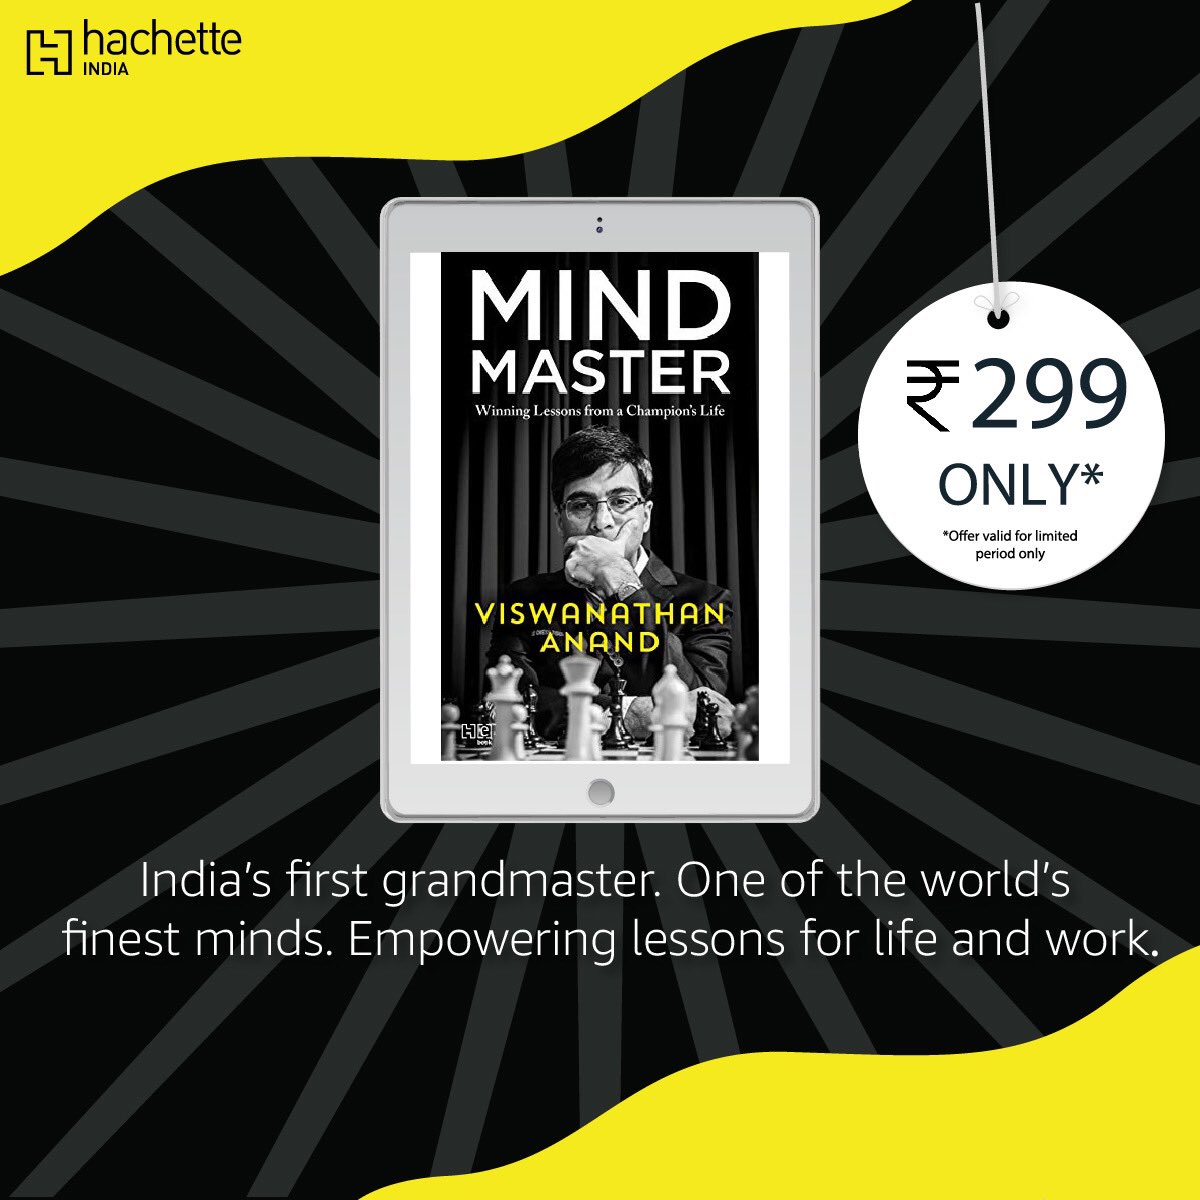 svulst huh Hændelse, begivenhed Viswanathan Anand on Twitter: "Now on Kindle! Many had asked when Mind  Master would be on Kindle. Well here it is. @HachetteIndia @ninansusan  https://t.co/zylyvS9tIv https://t.co/JJsSZuencB" / Twitter